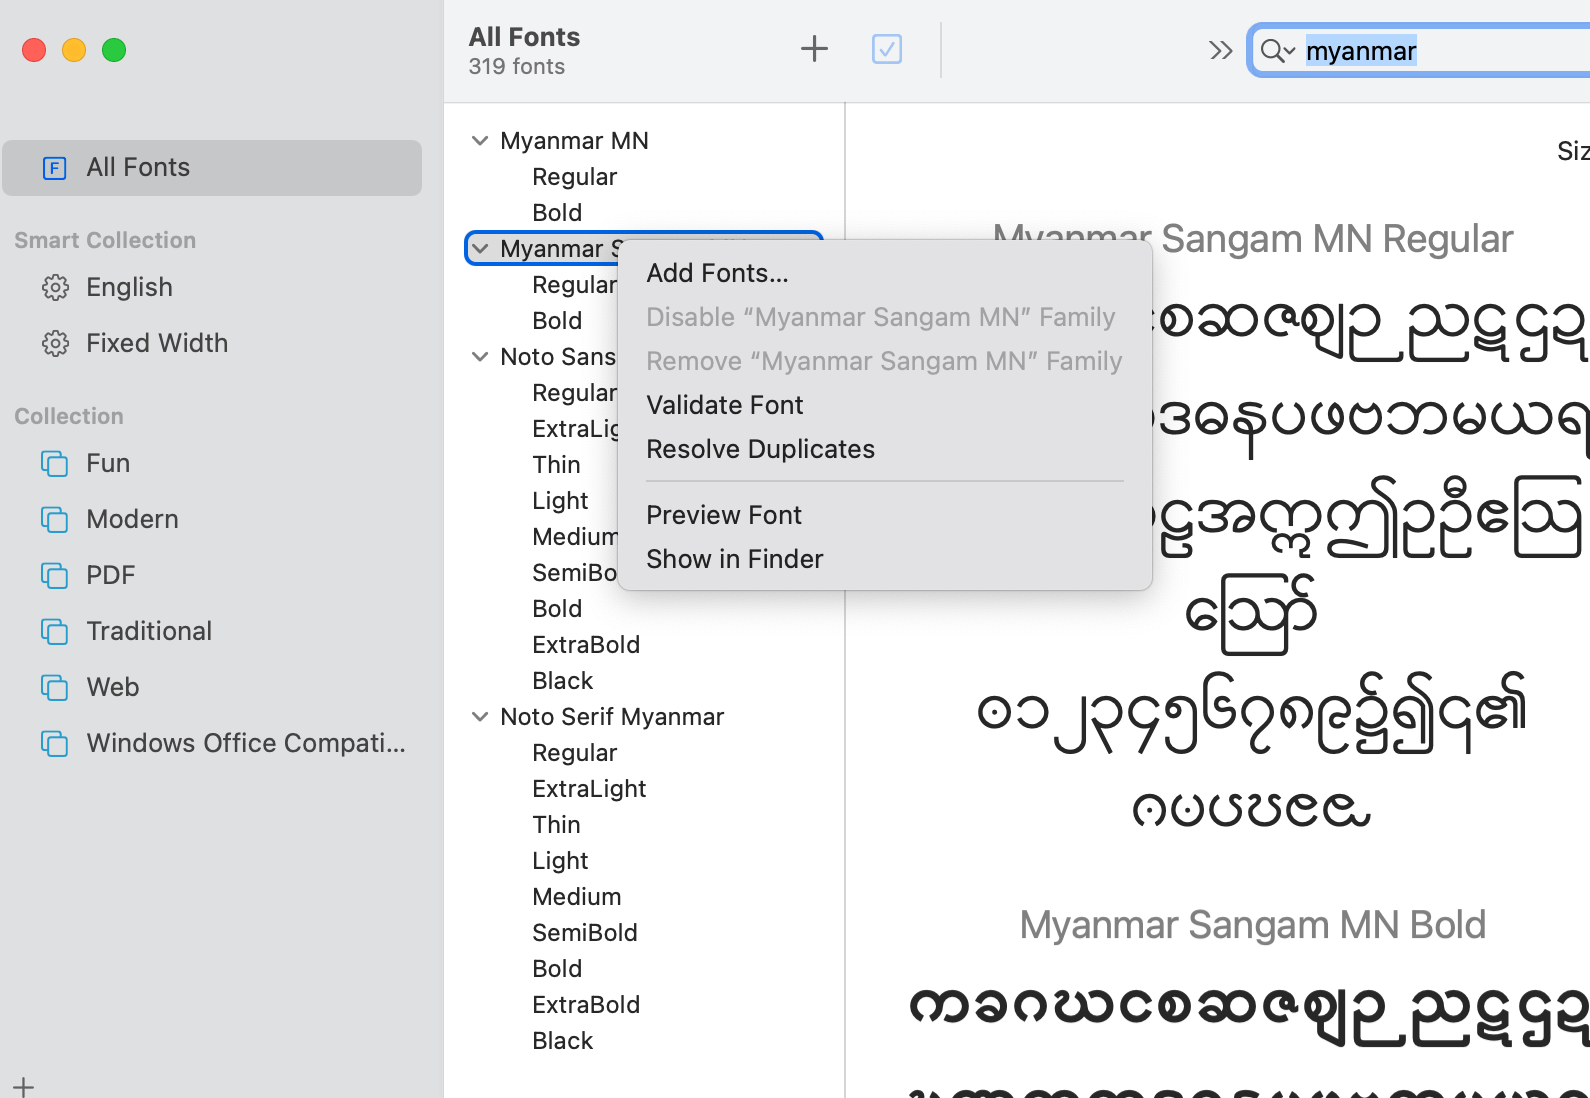 myanmar-unicode-fonts-displaying-incorrectly-in-the-cells-but